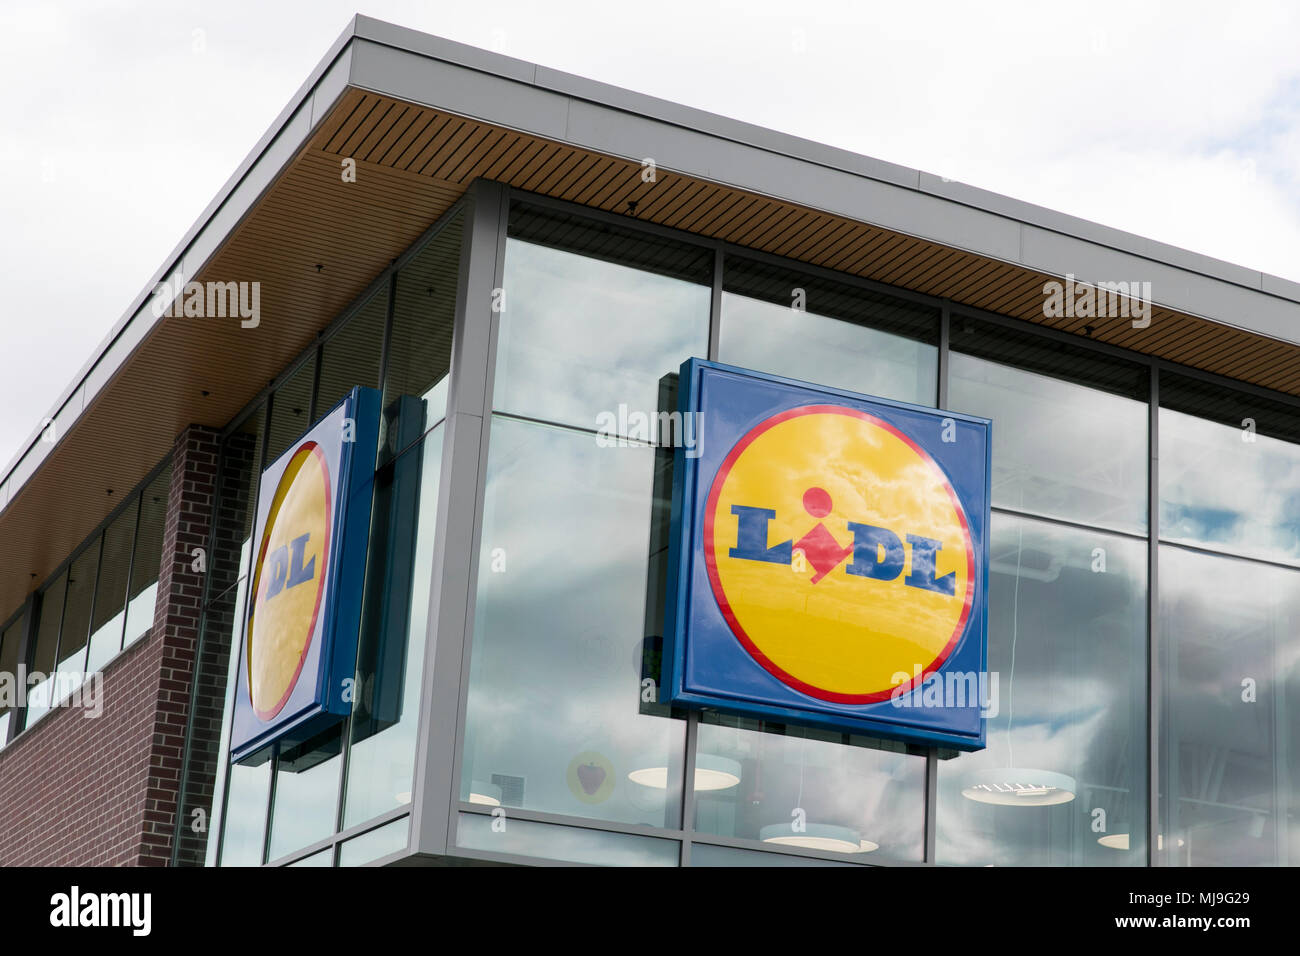 A logo sign outside of a Lidl grocery retail store in Middletown, Delaware on April 29, 2018. Stock Photo